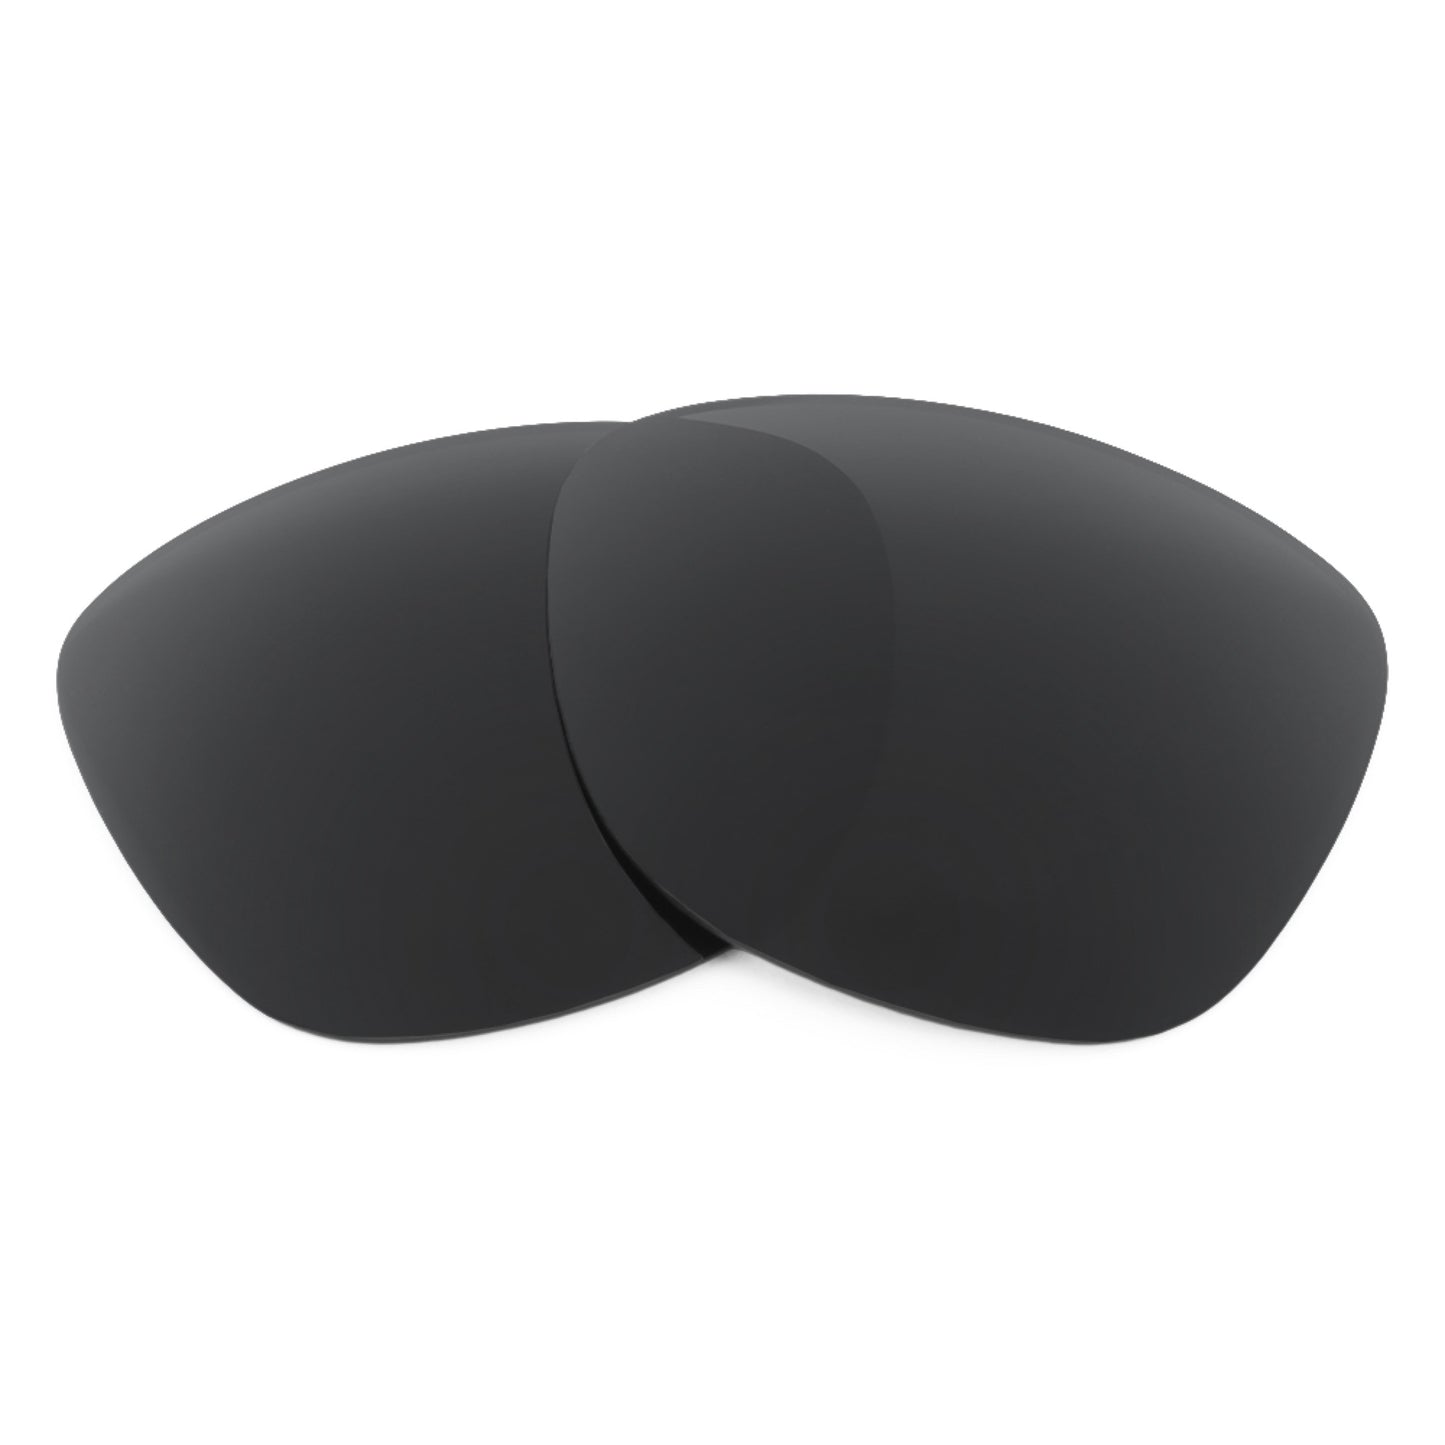 Revant replacement lenses for Ray-Ban Justin RB4165 51mm Non-Polarized Stealth Black